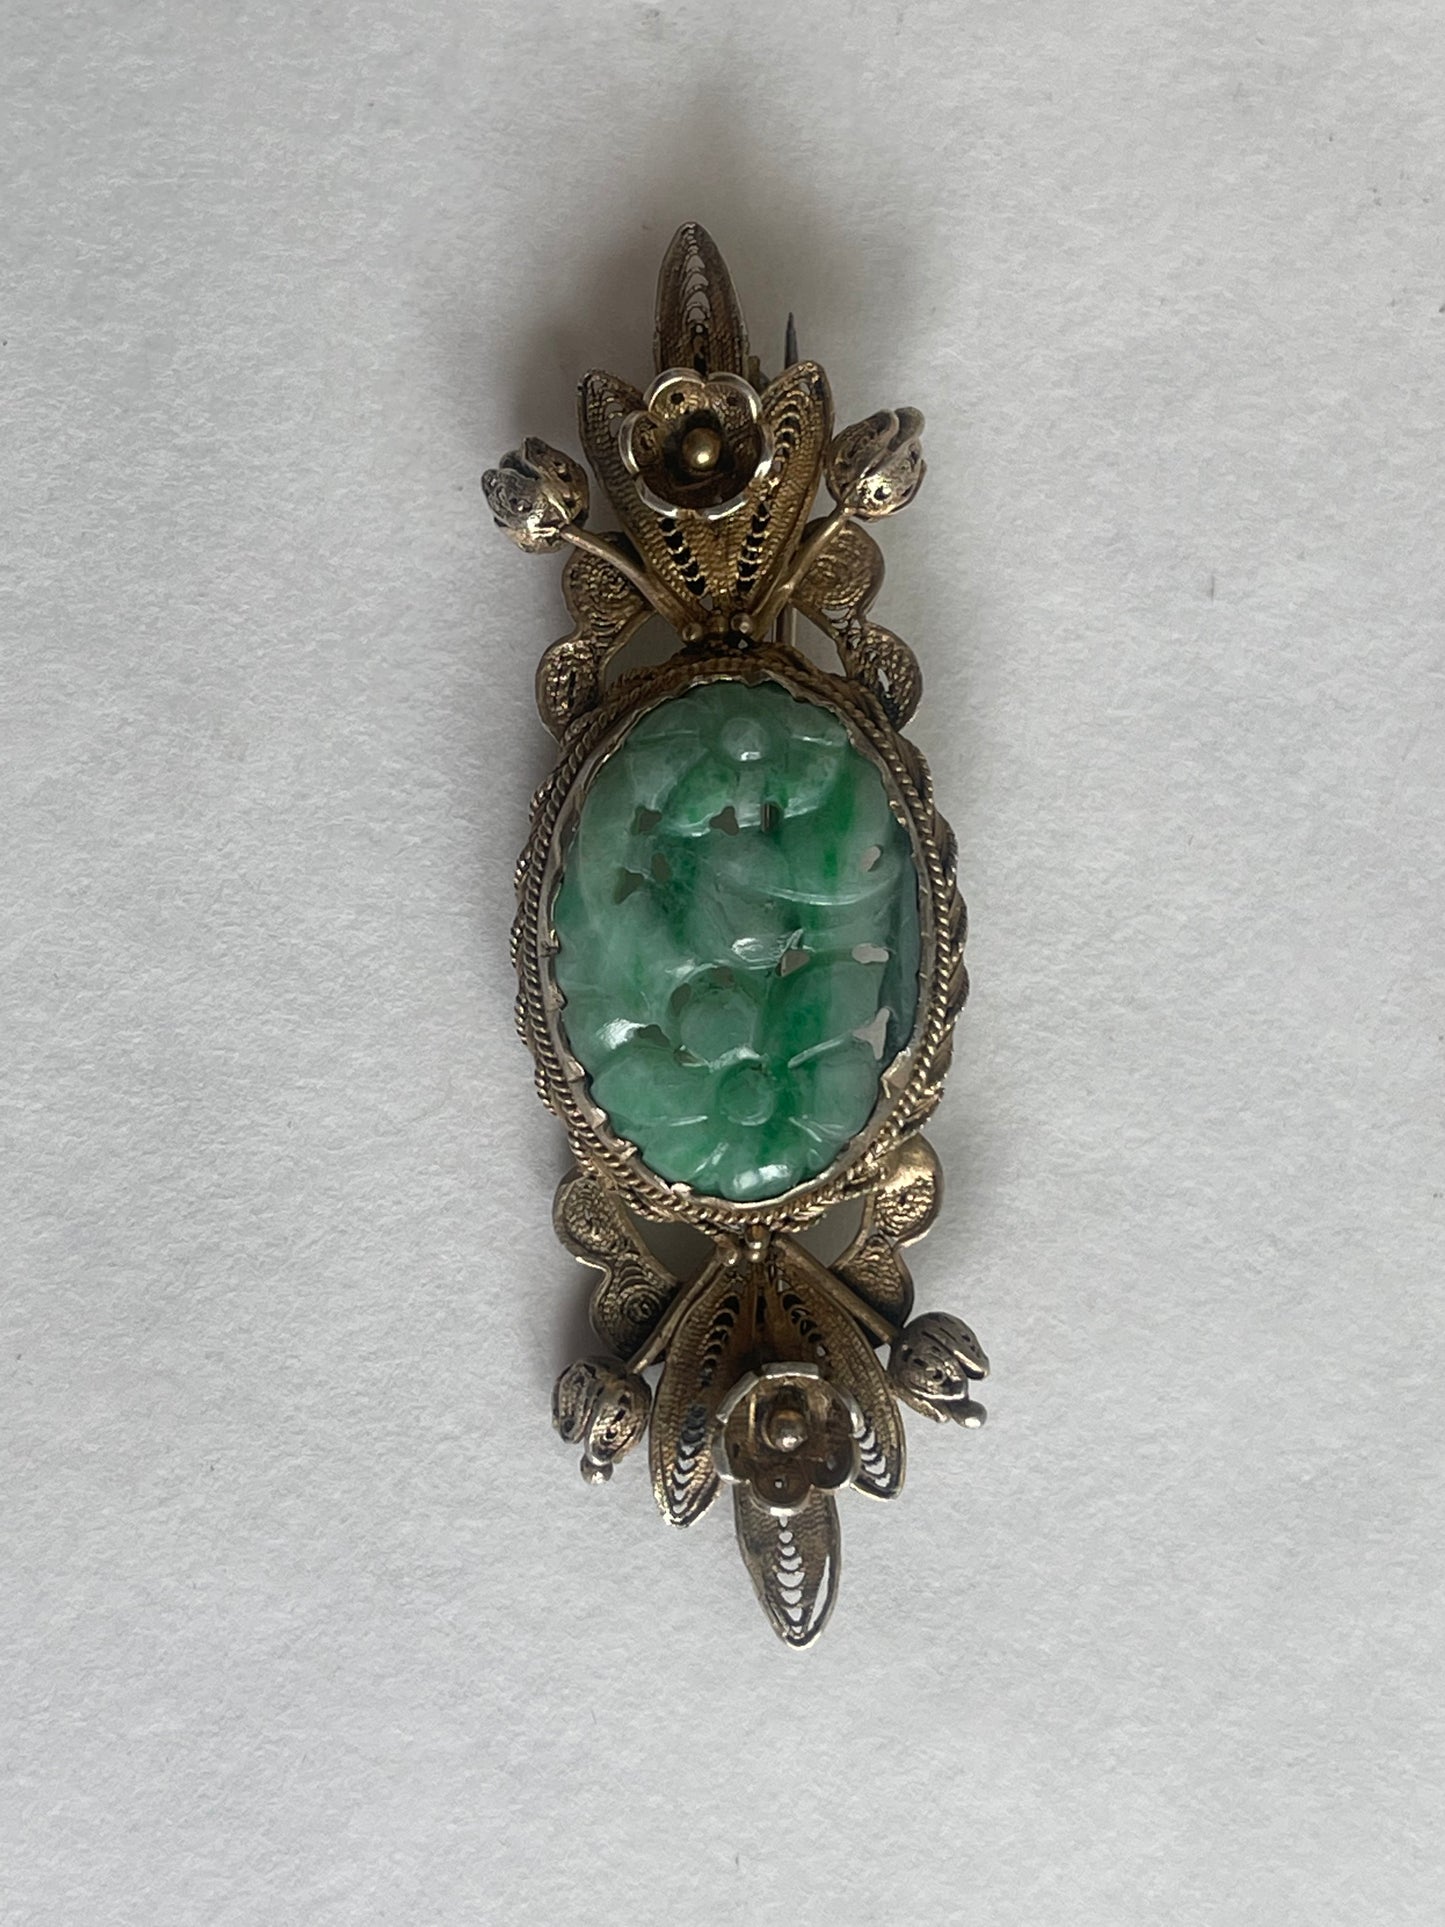 A vintage jade brooch In a gilded silver setting